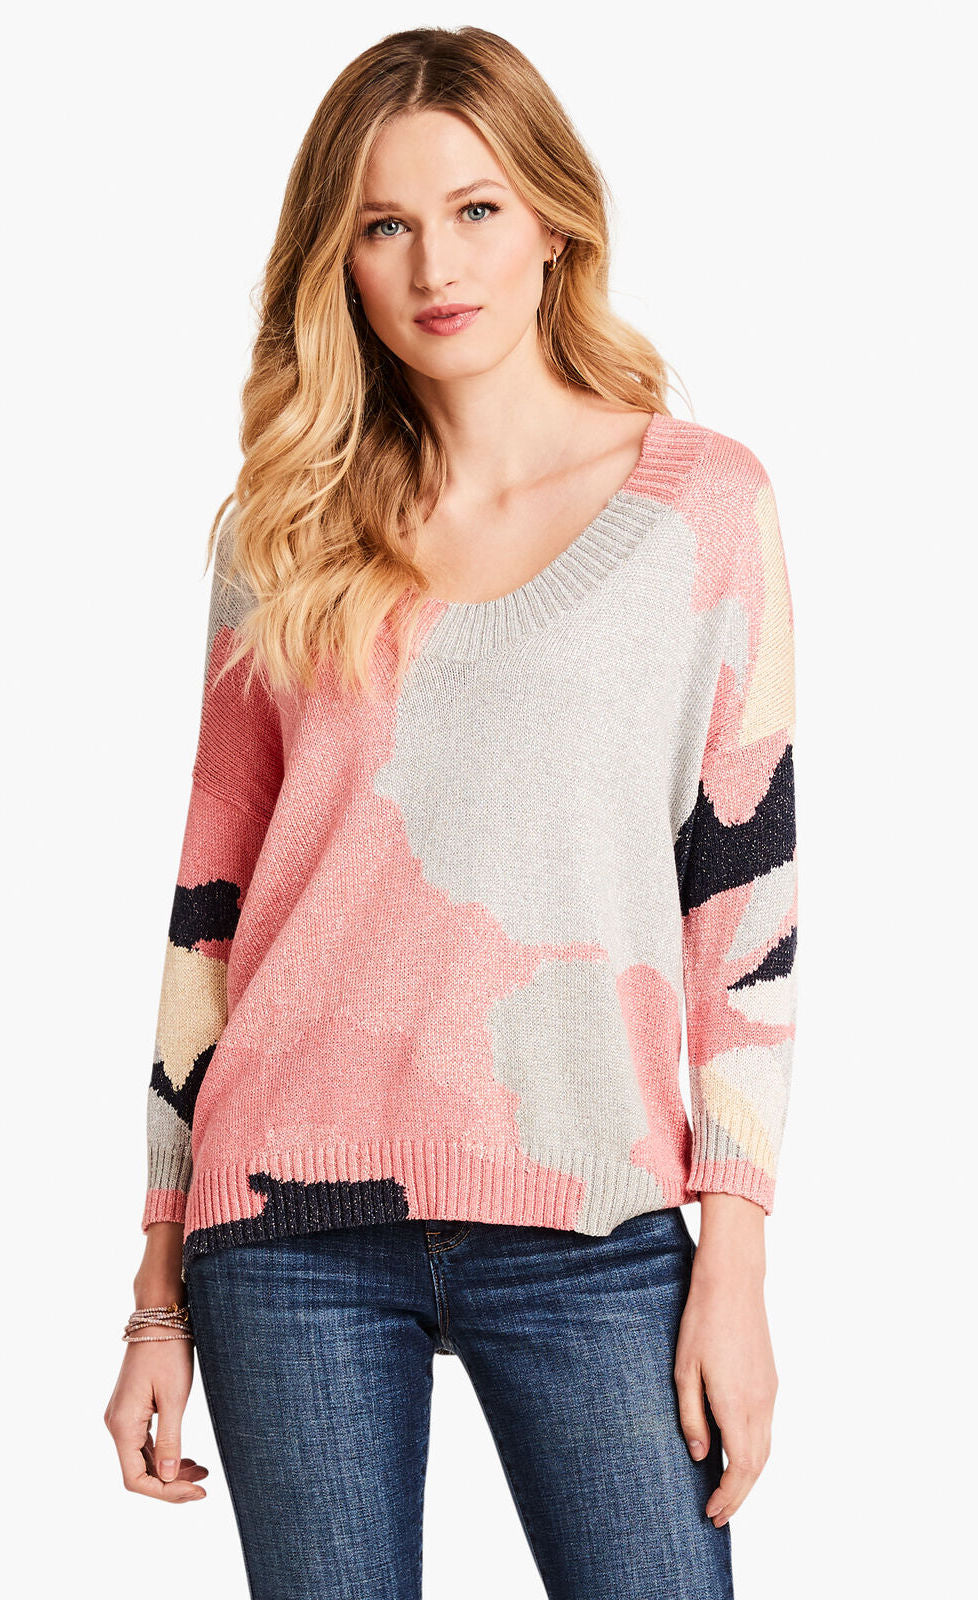 Front top half view of a model wearing the nic+zoe citrus splash sweater. This sweater is mainly pink with abstract colors of grey, blue, and creme all over it. This sweater has long sleeves, and a v-neck.